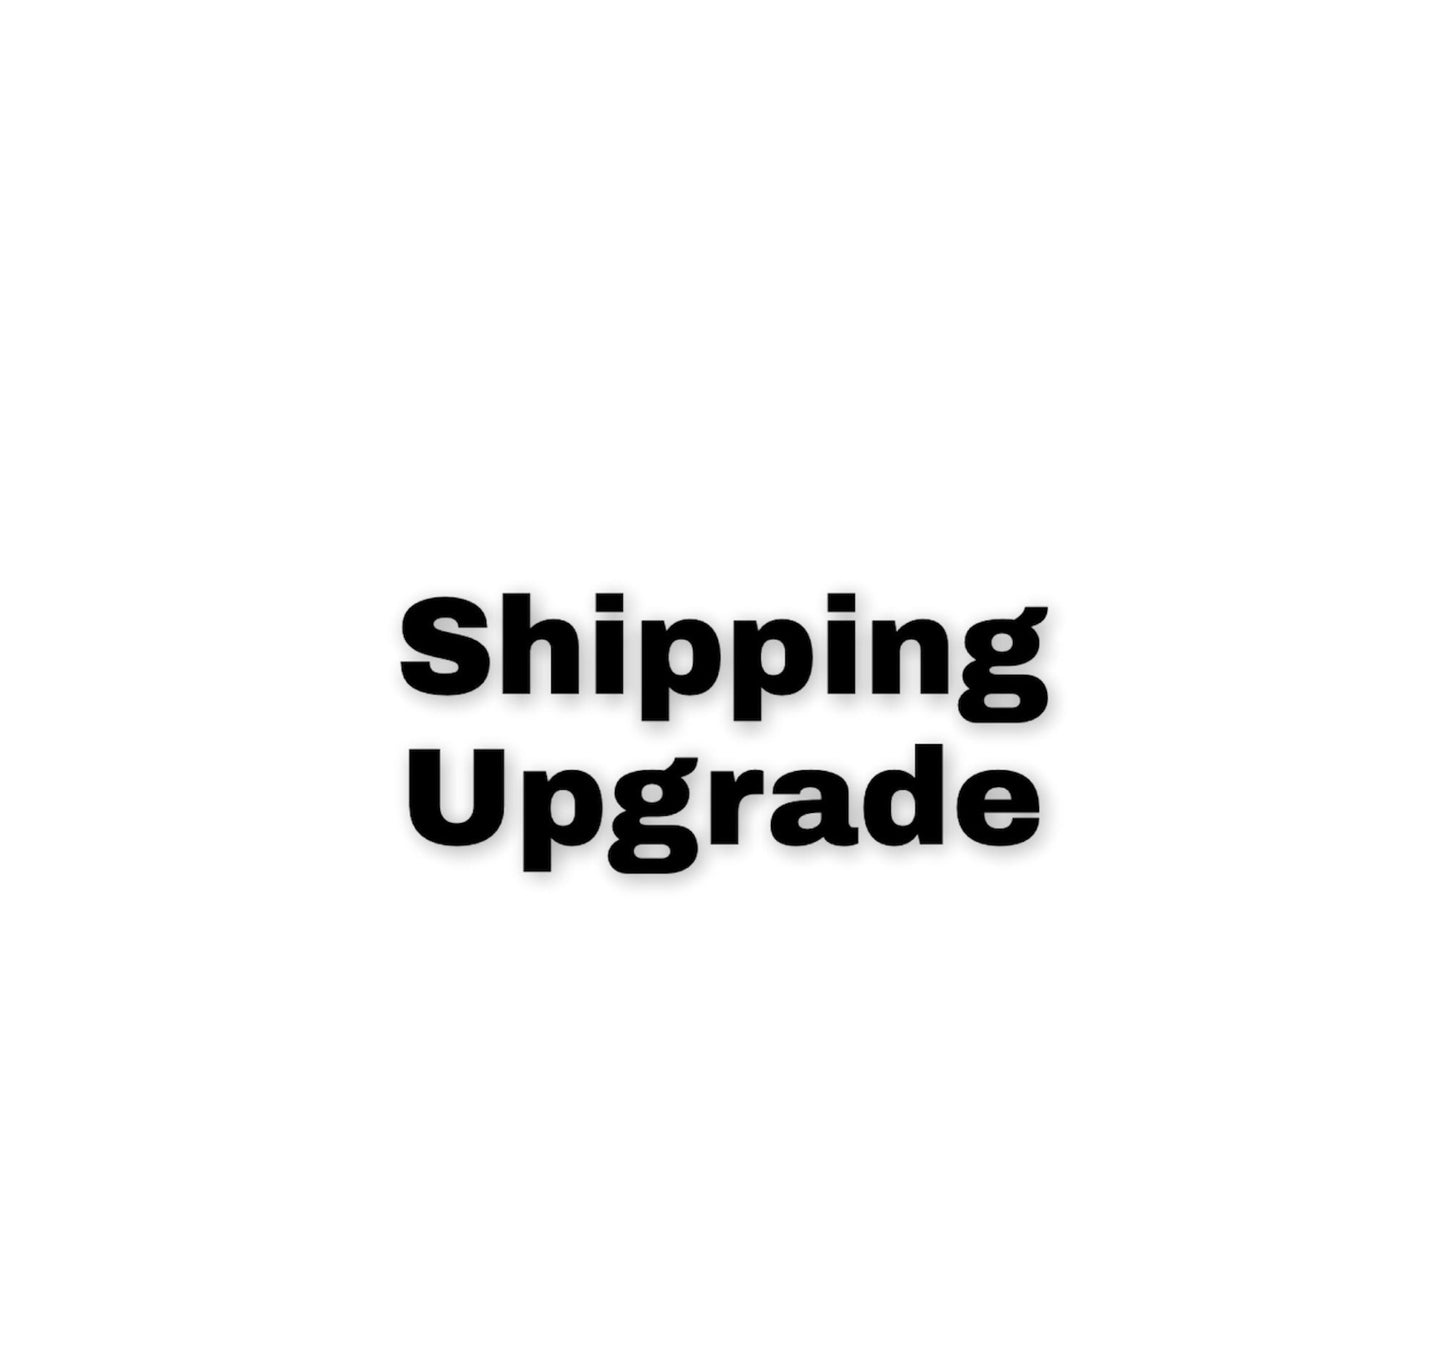 Mon Bijoux Fast Shipping Upgrade Service- Expedited Shipping for Jewelry - Get Your Jewelry Fast - Fast Shipping with Top Logistics Company